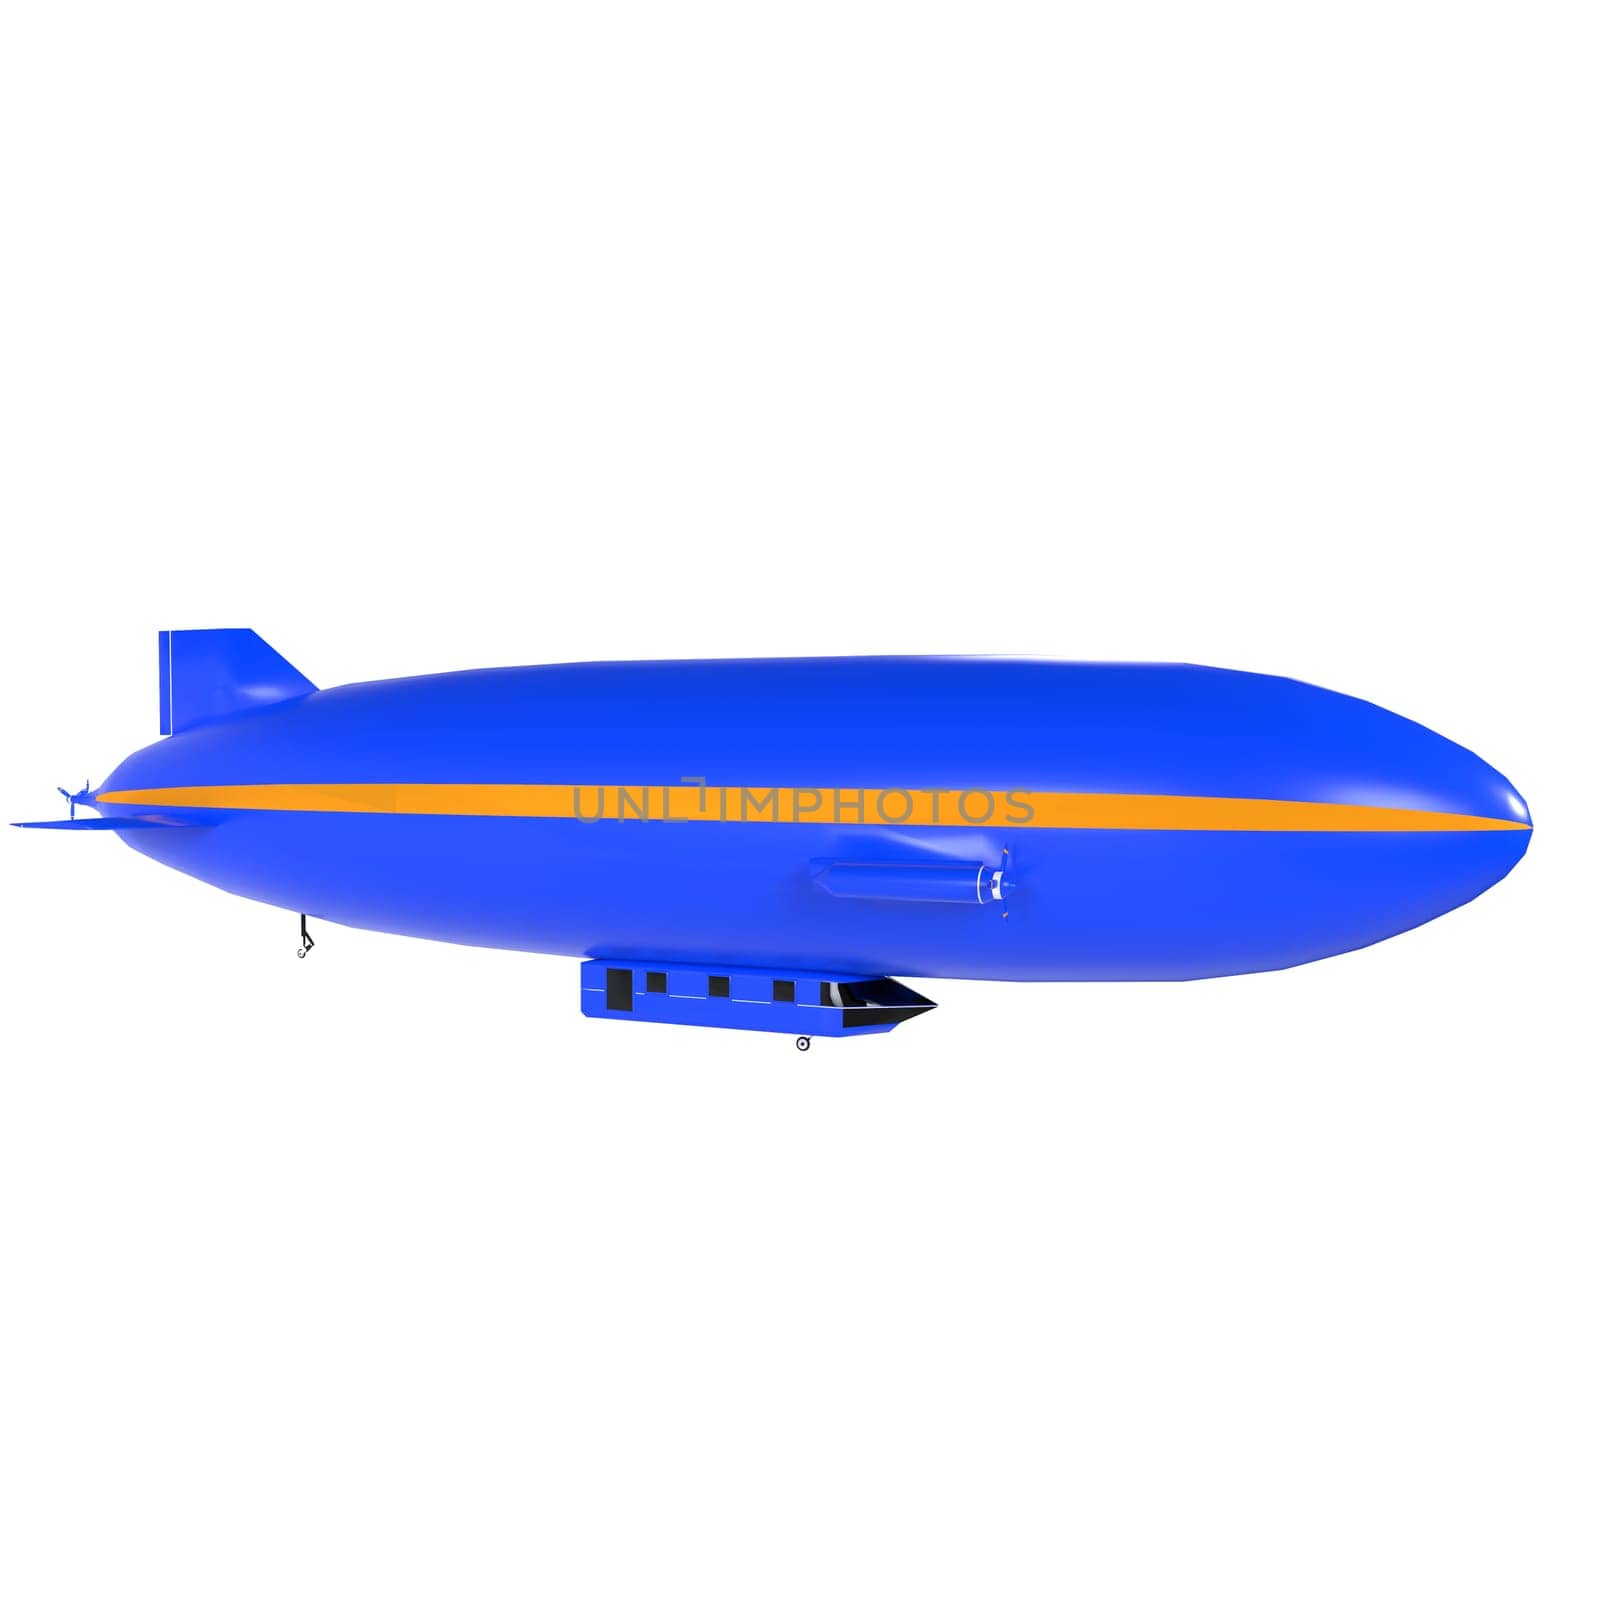 Blue Airship isolated on white background. High quality 3d illustration